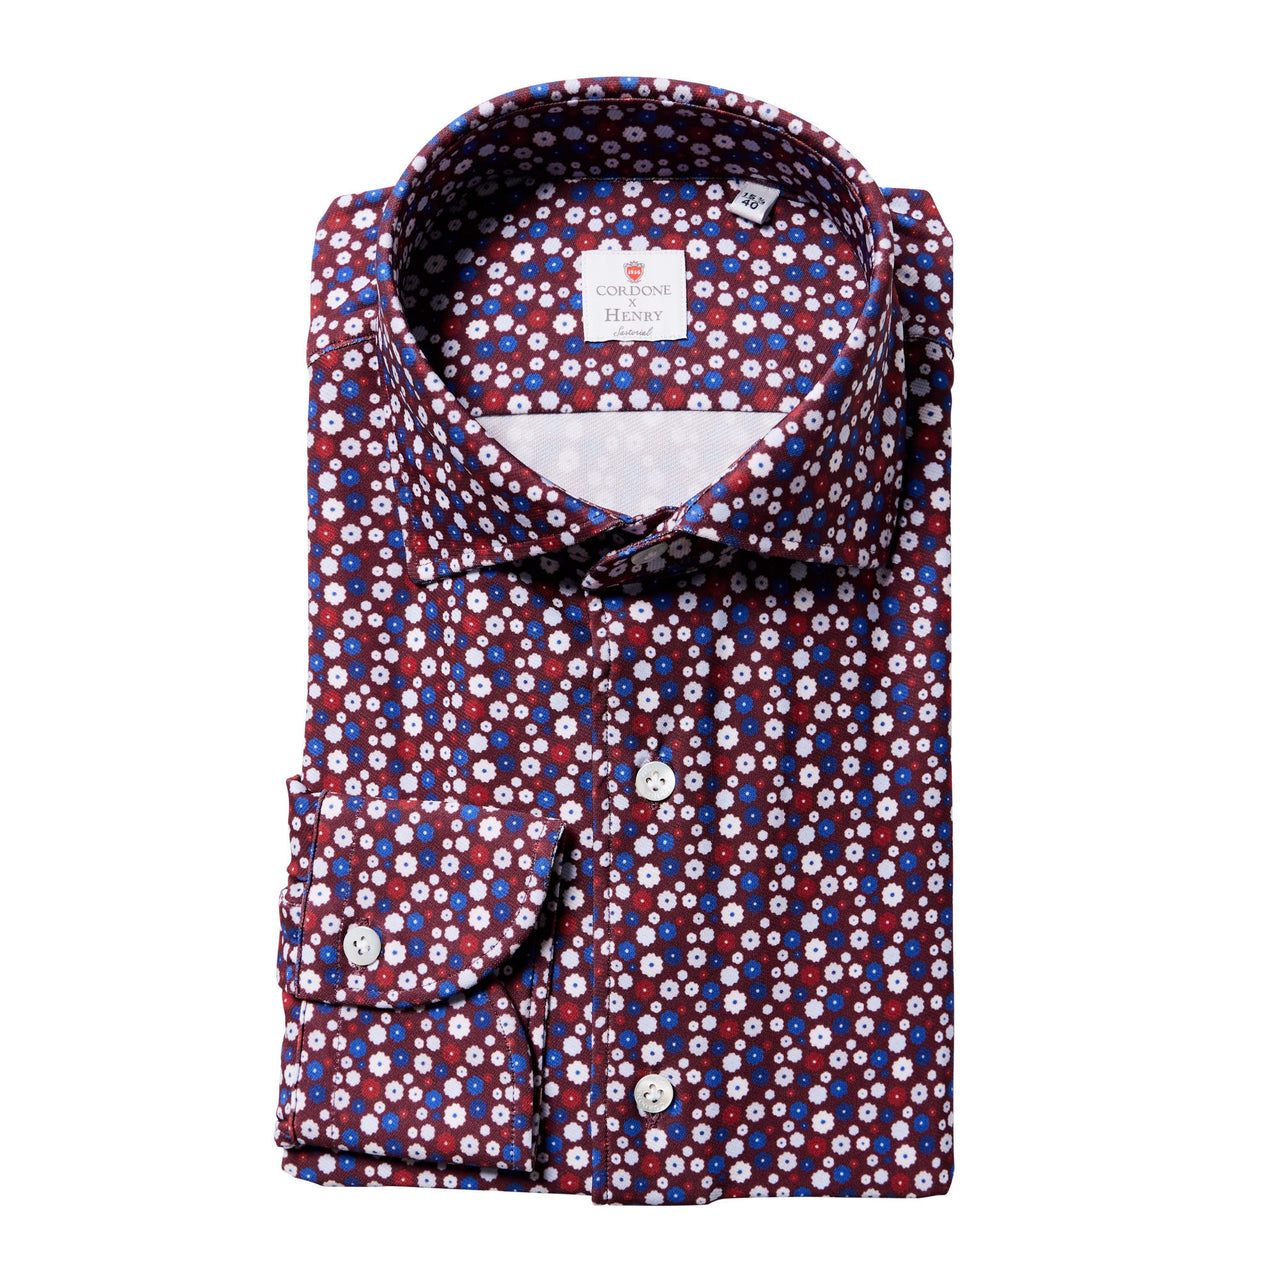 CORDONE Circles Printed Shirt Double Cuff Classic Fit BLUE/RED/WHITE